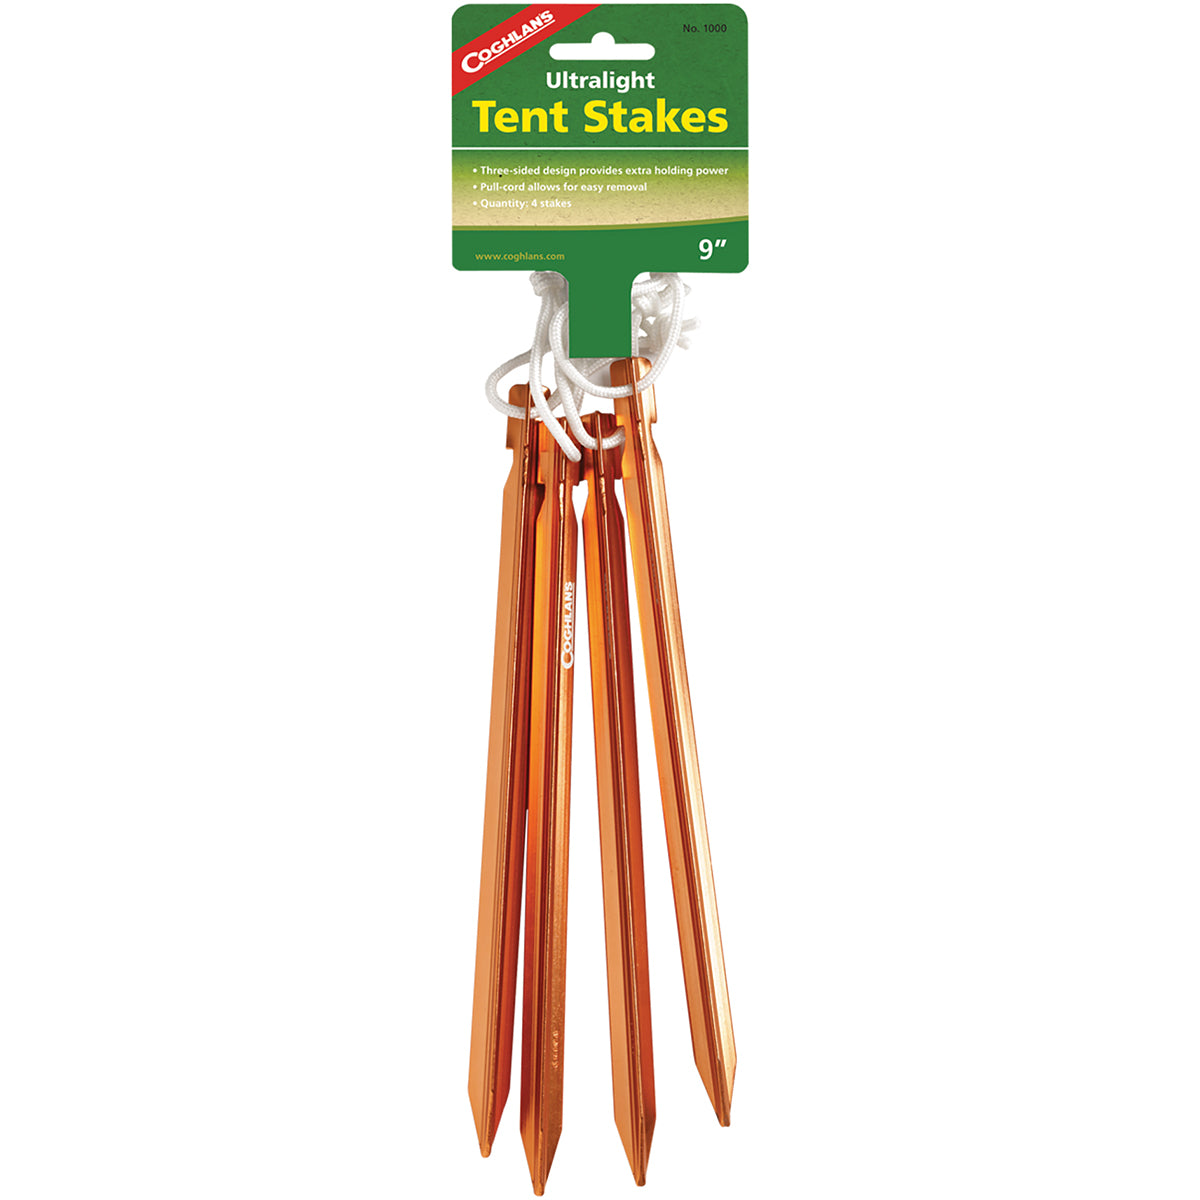 Coghlan's Ultralight Tent Stakes 9" w/ Pull Cord (4 Pack), Backpacking Camping Coghlan's